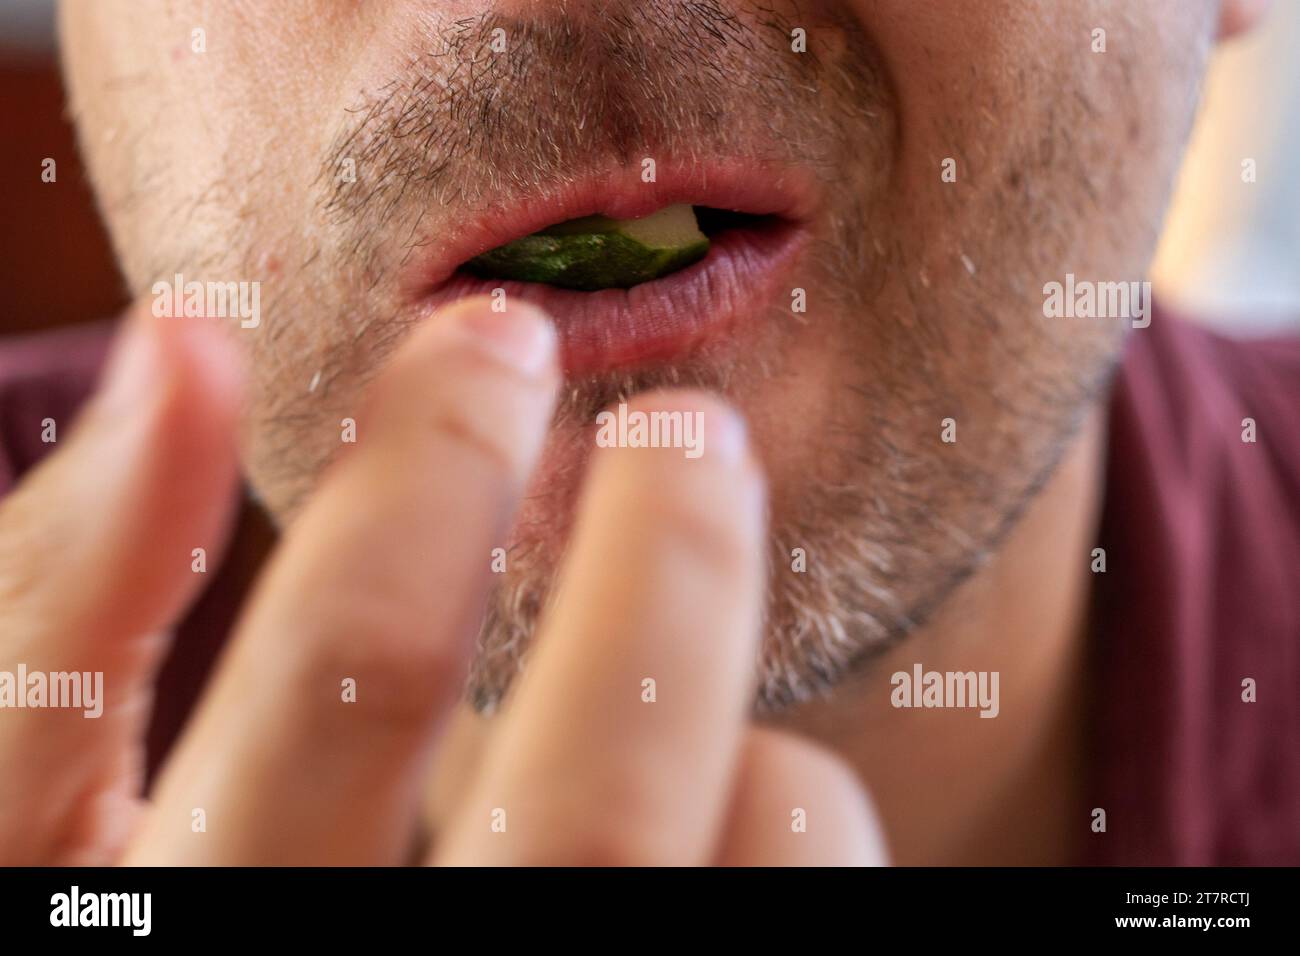 biting off a piece of fresh home grown cucumber with your teeth Stock Photo